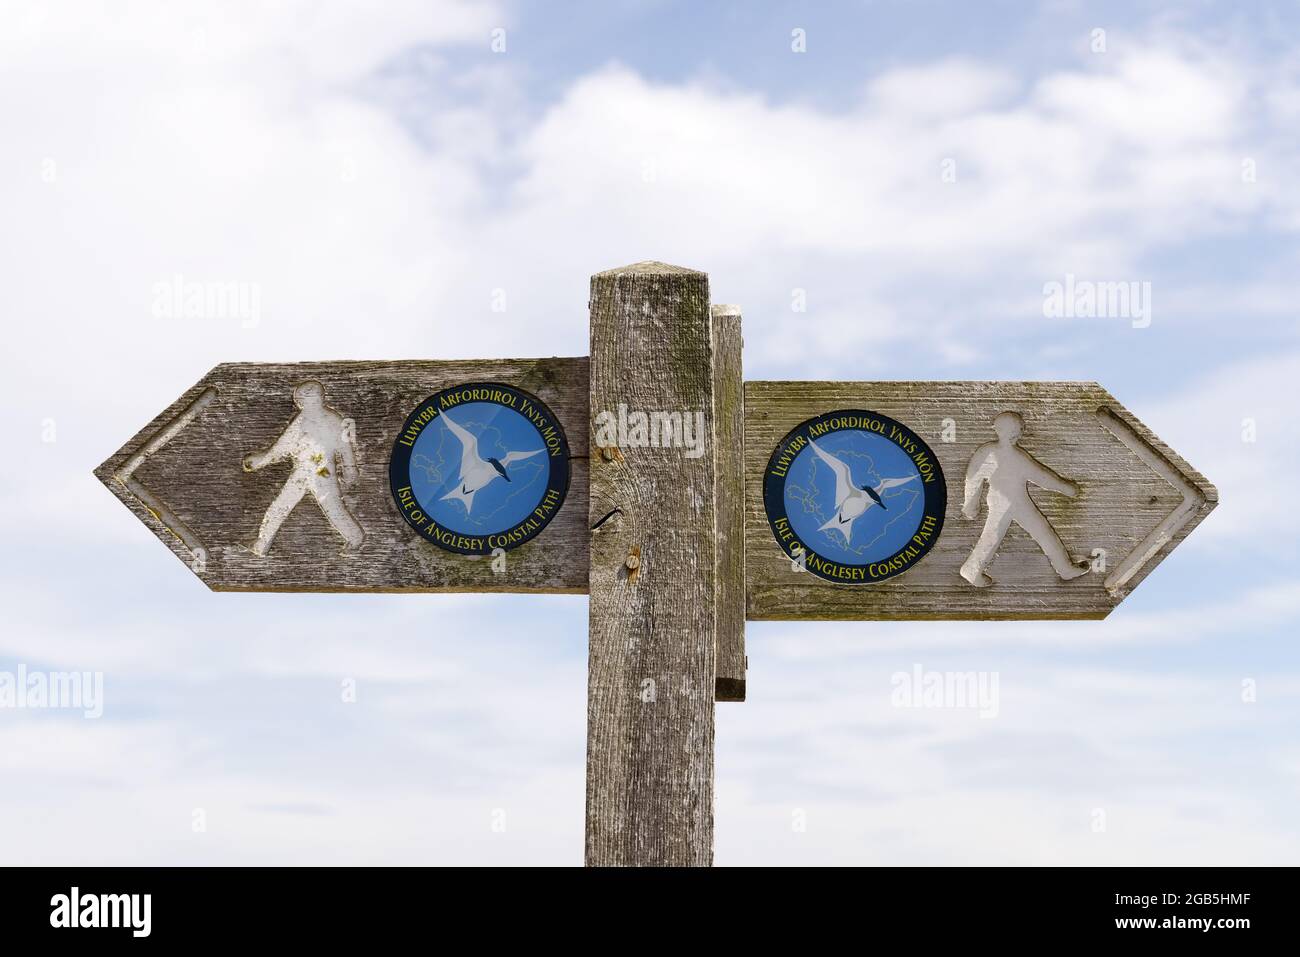 Isle of Anglesey Coastal Path sign, part of the Wales Coast path, Anglesey, Wales UK for people taking a walking holiday. Stock Photo